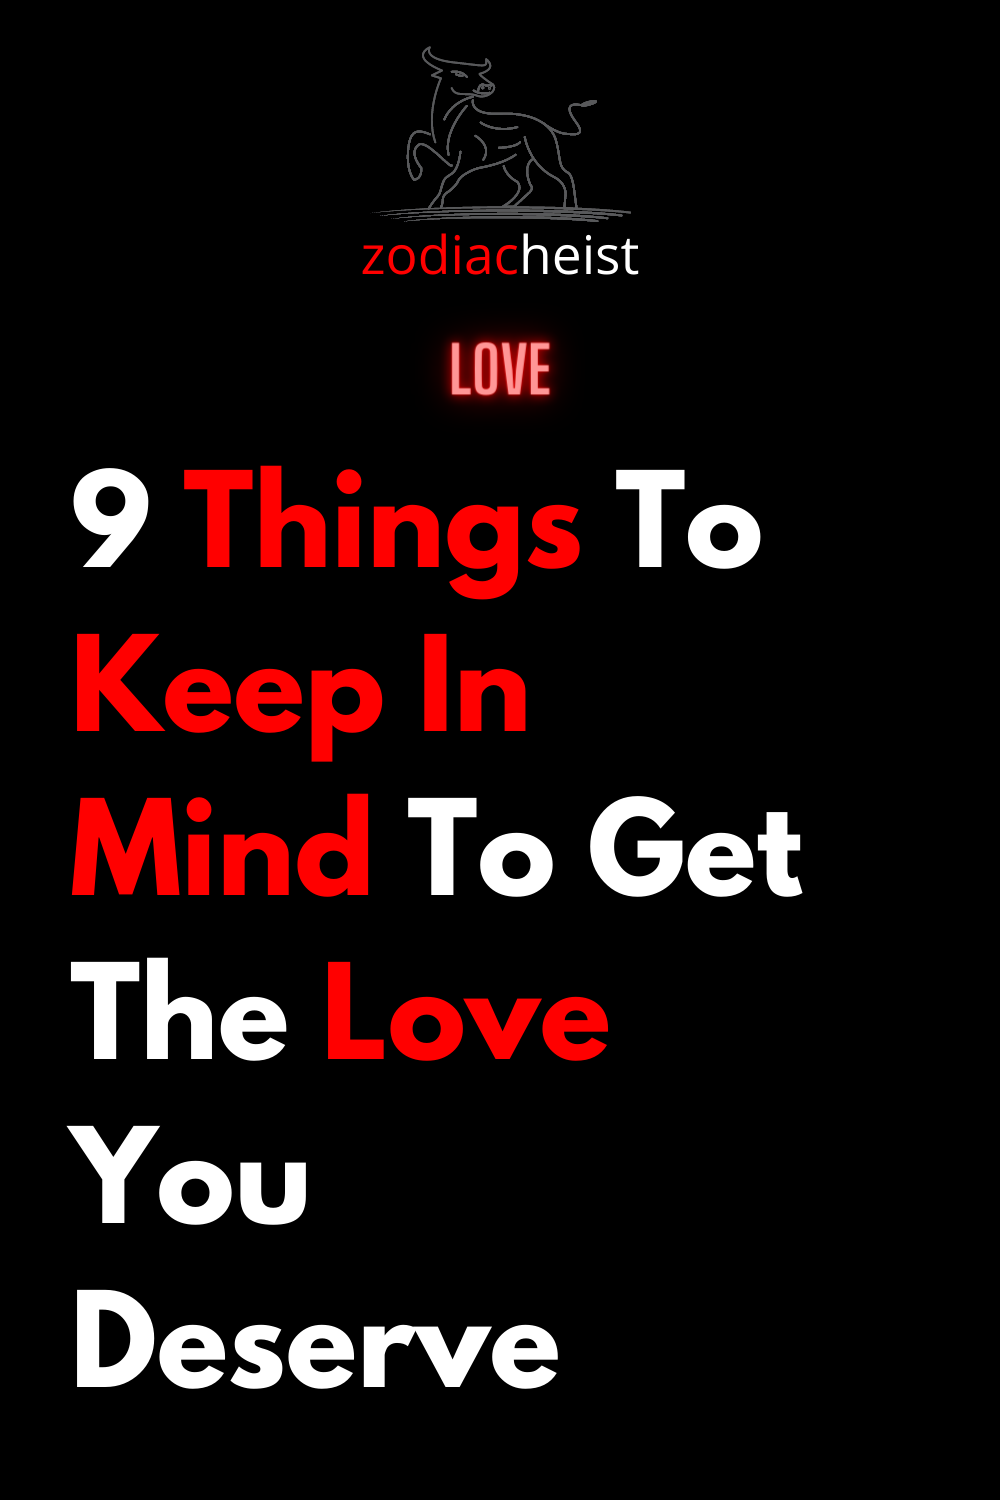 9 Things To Keep In Mind To Get The Love You Deserve